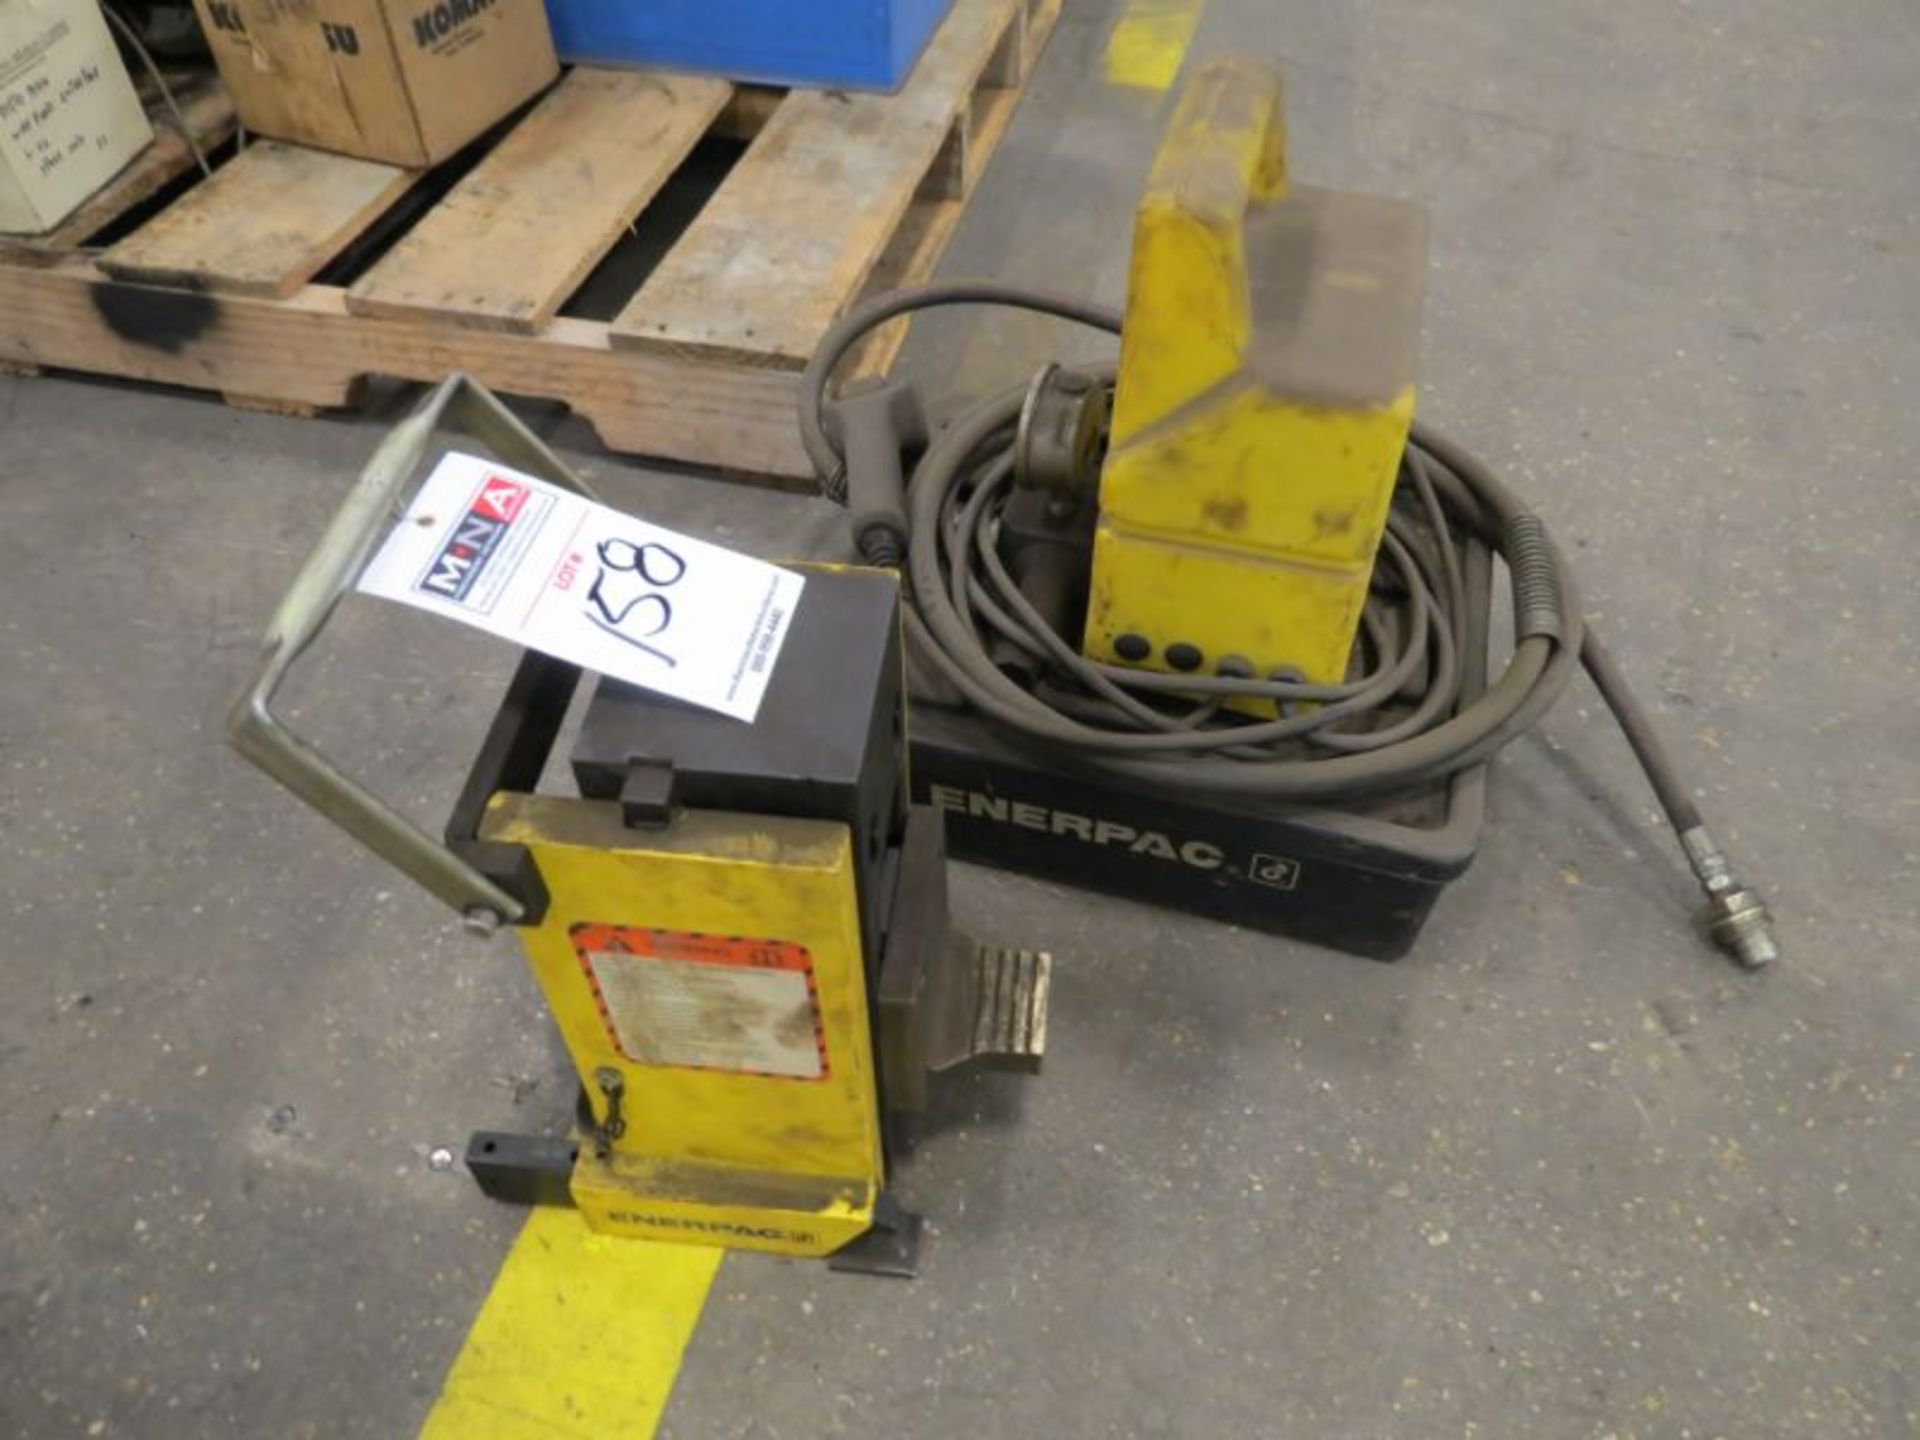 Enerpac Hydraulic Jack With Pump Model:PUJ12018 S/n:E17060 - Image 3 of 5